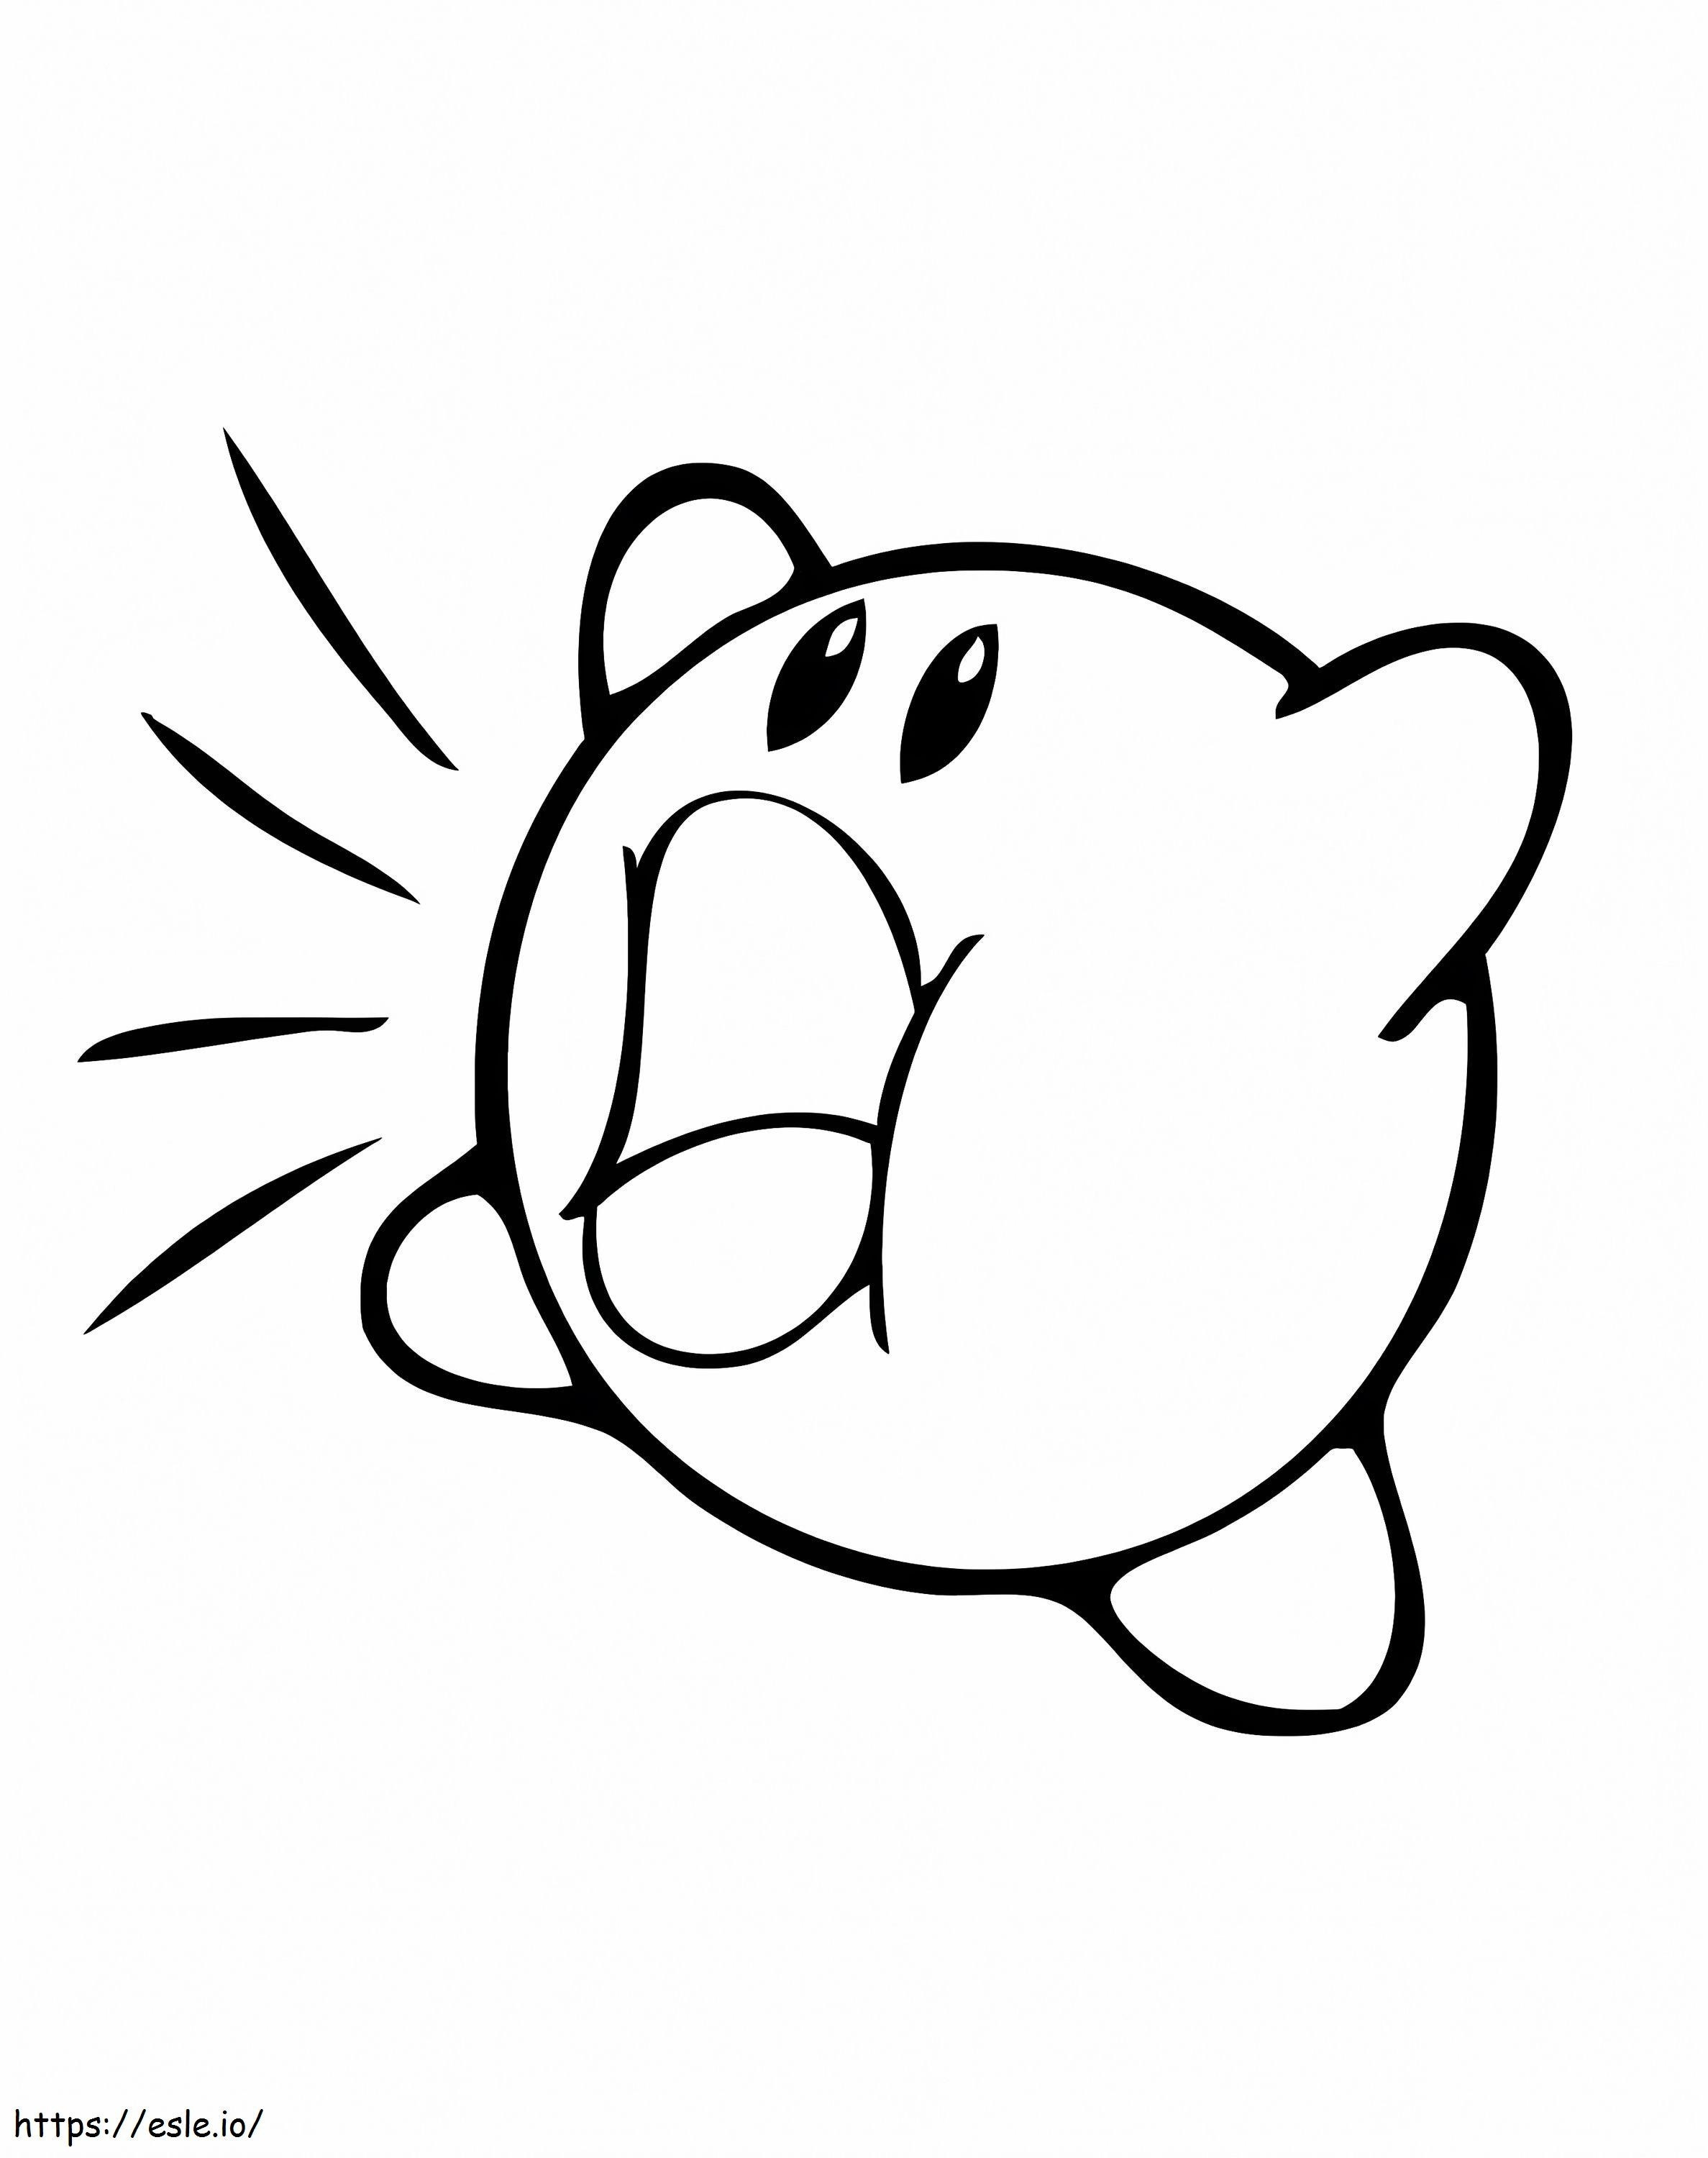 Little Kirby coloring page